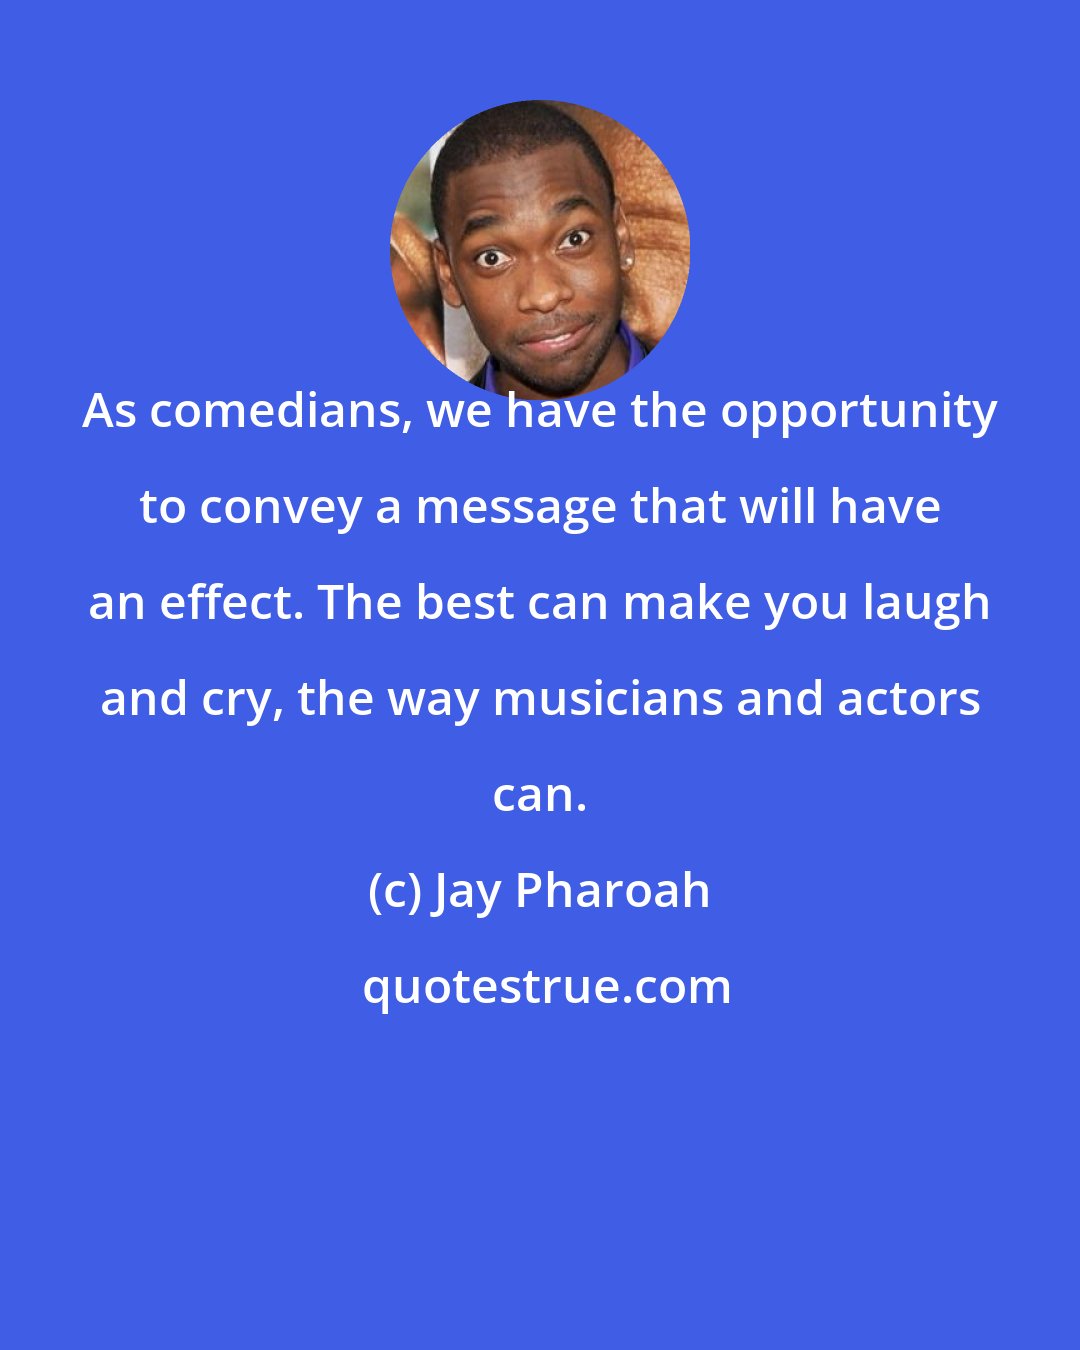 Jay Pharoah: As comedians, we have the opportunity to convey a message that will have an effect. The best can make you laugh and cry, the way musicians and actors can.